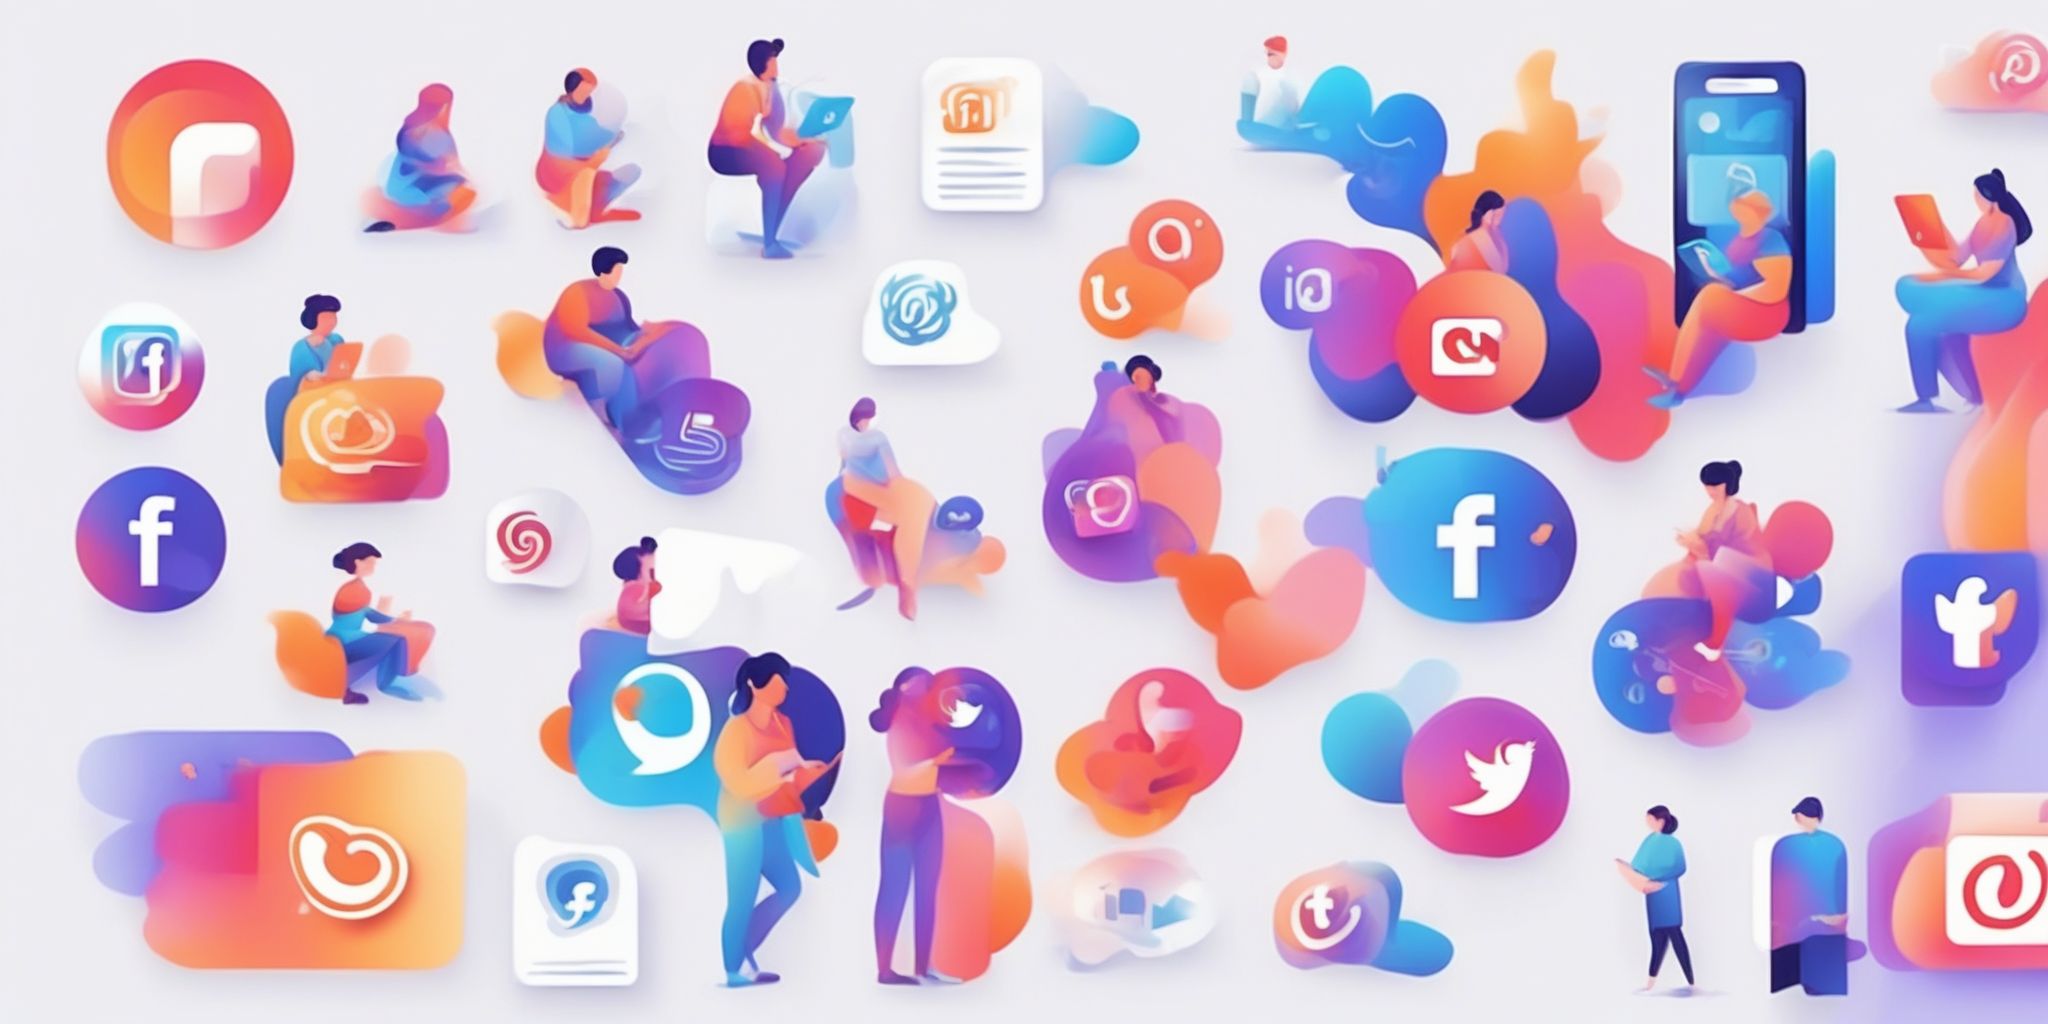 Social media in illustration style with gradients and white background